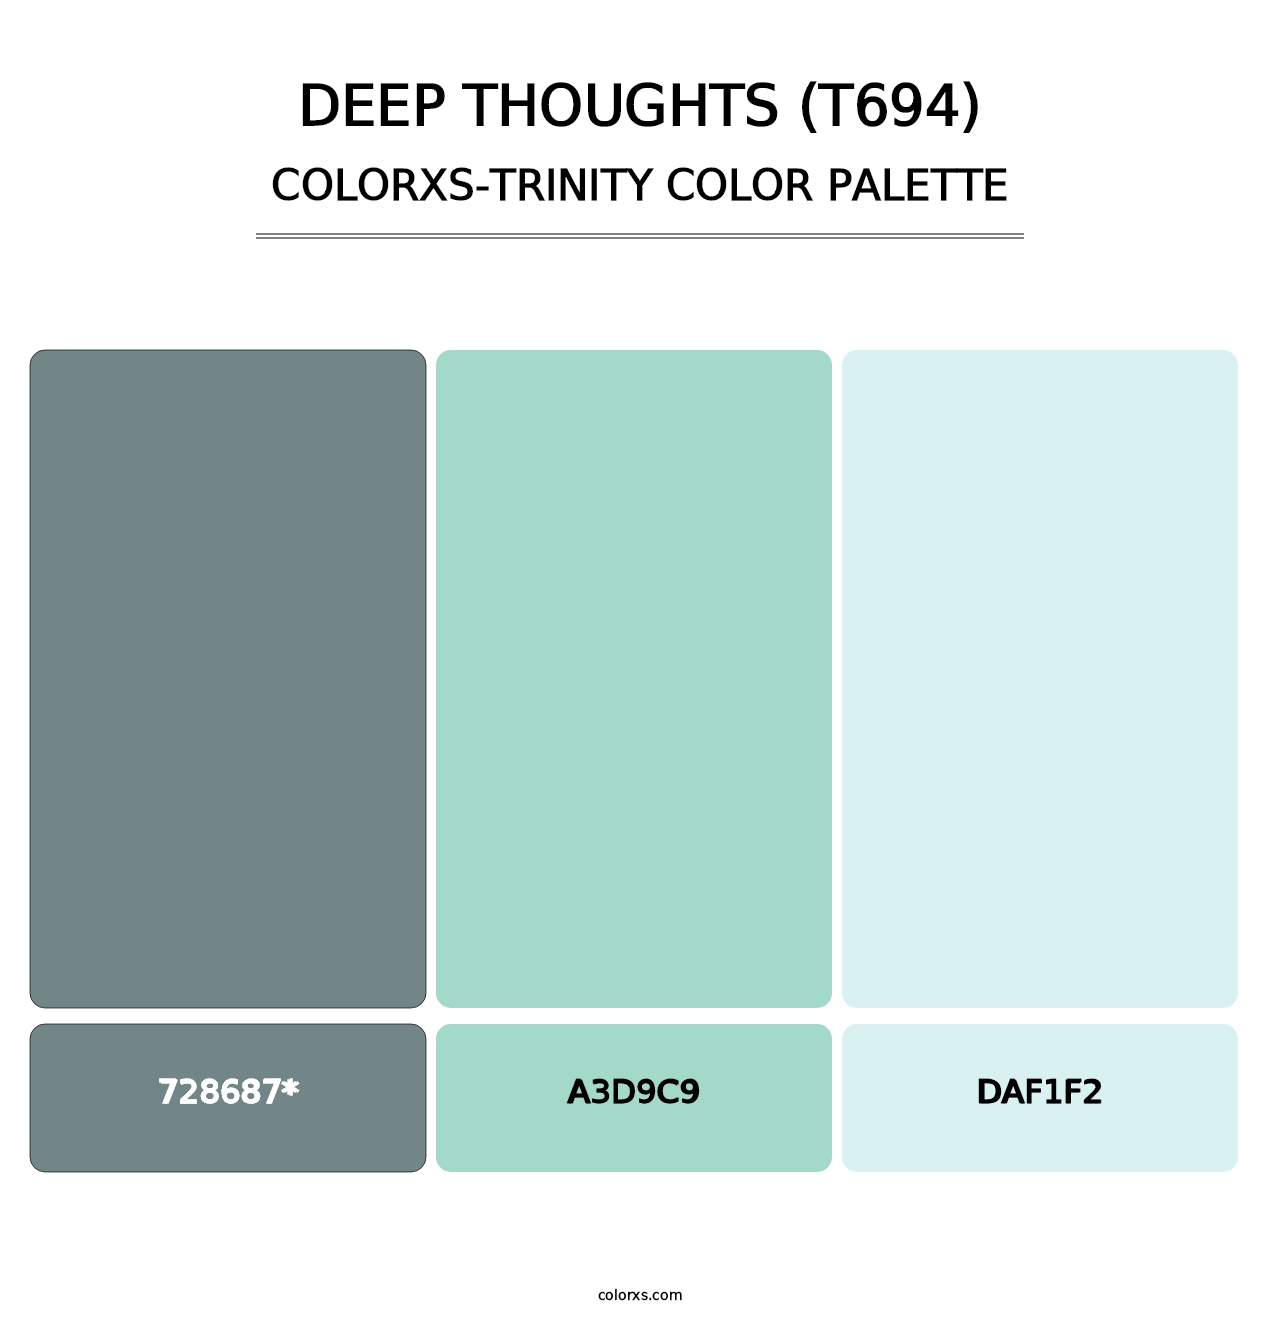 Deep Thoughts (T694) - Colorxs Trinity Palette